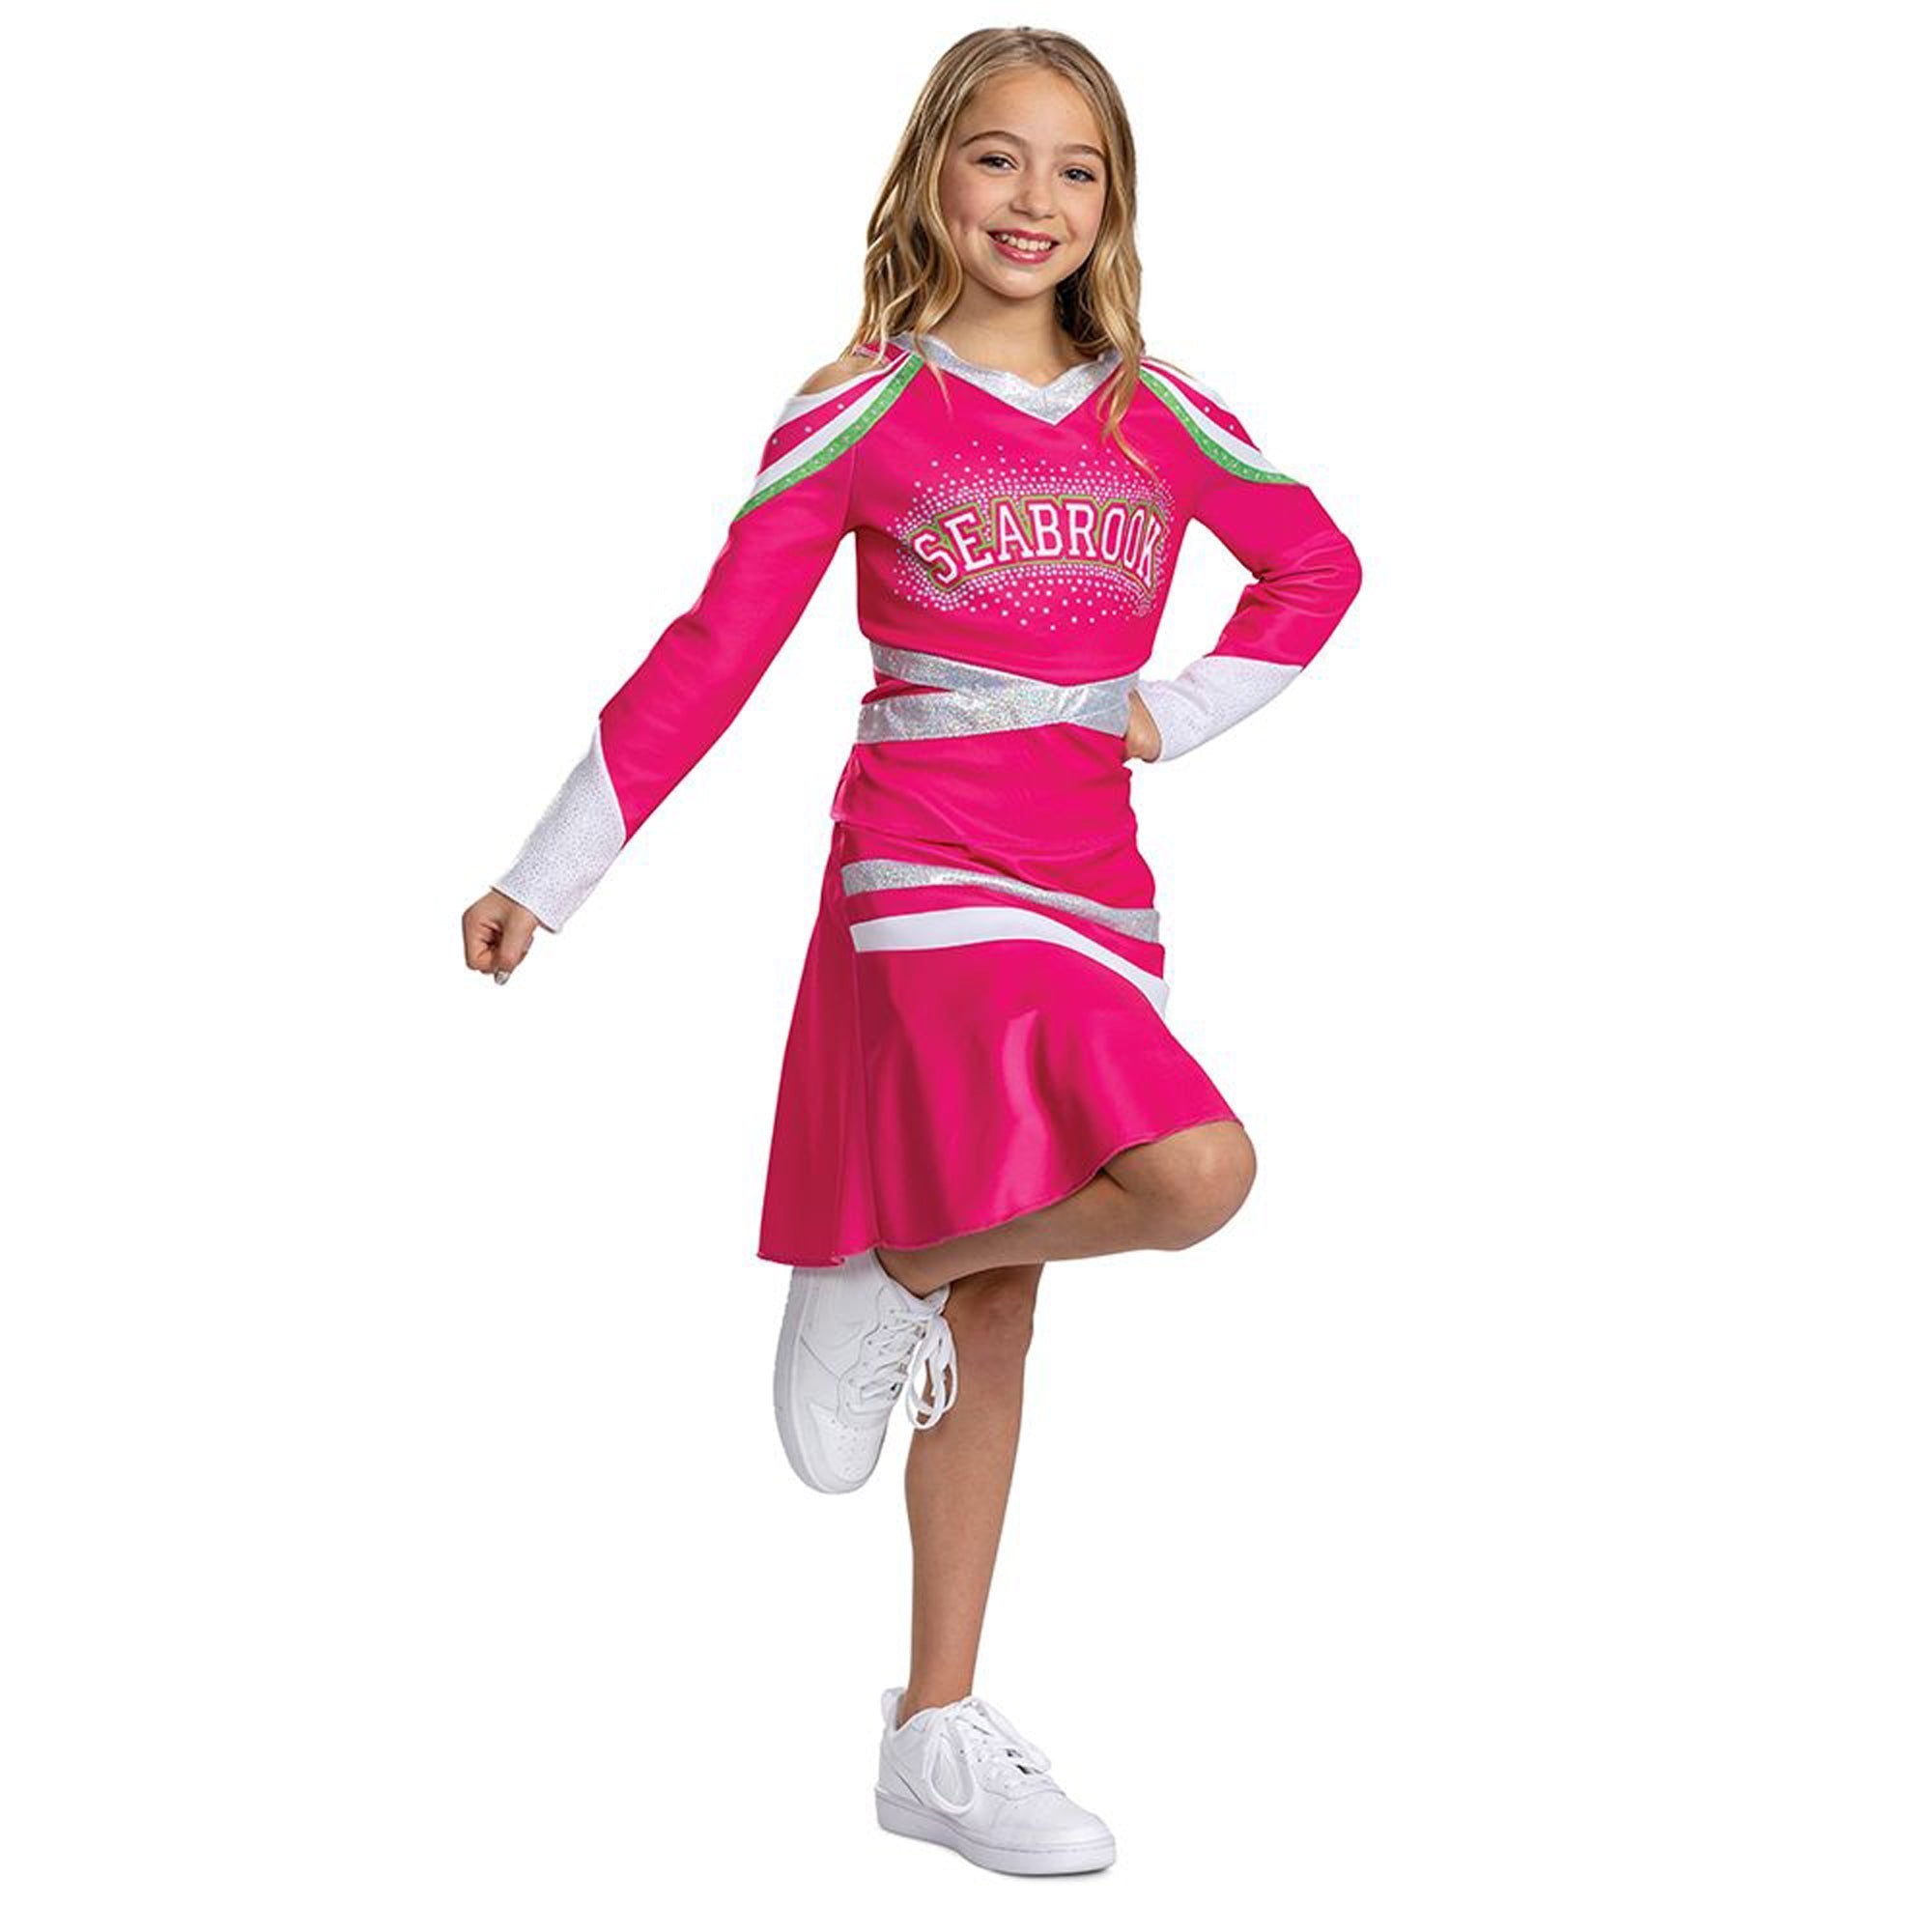 Zombie 3 Addison Cheer Classic Costume for Kids